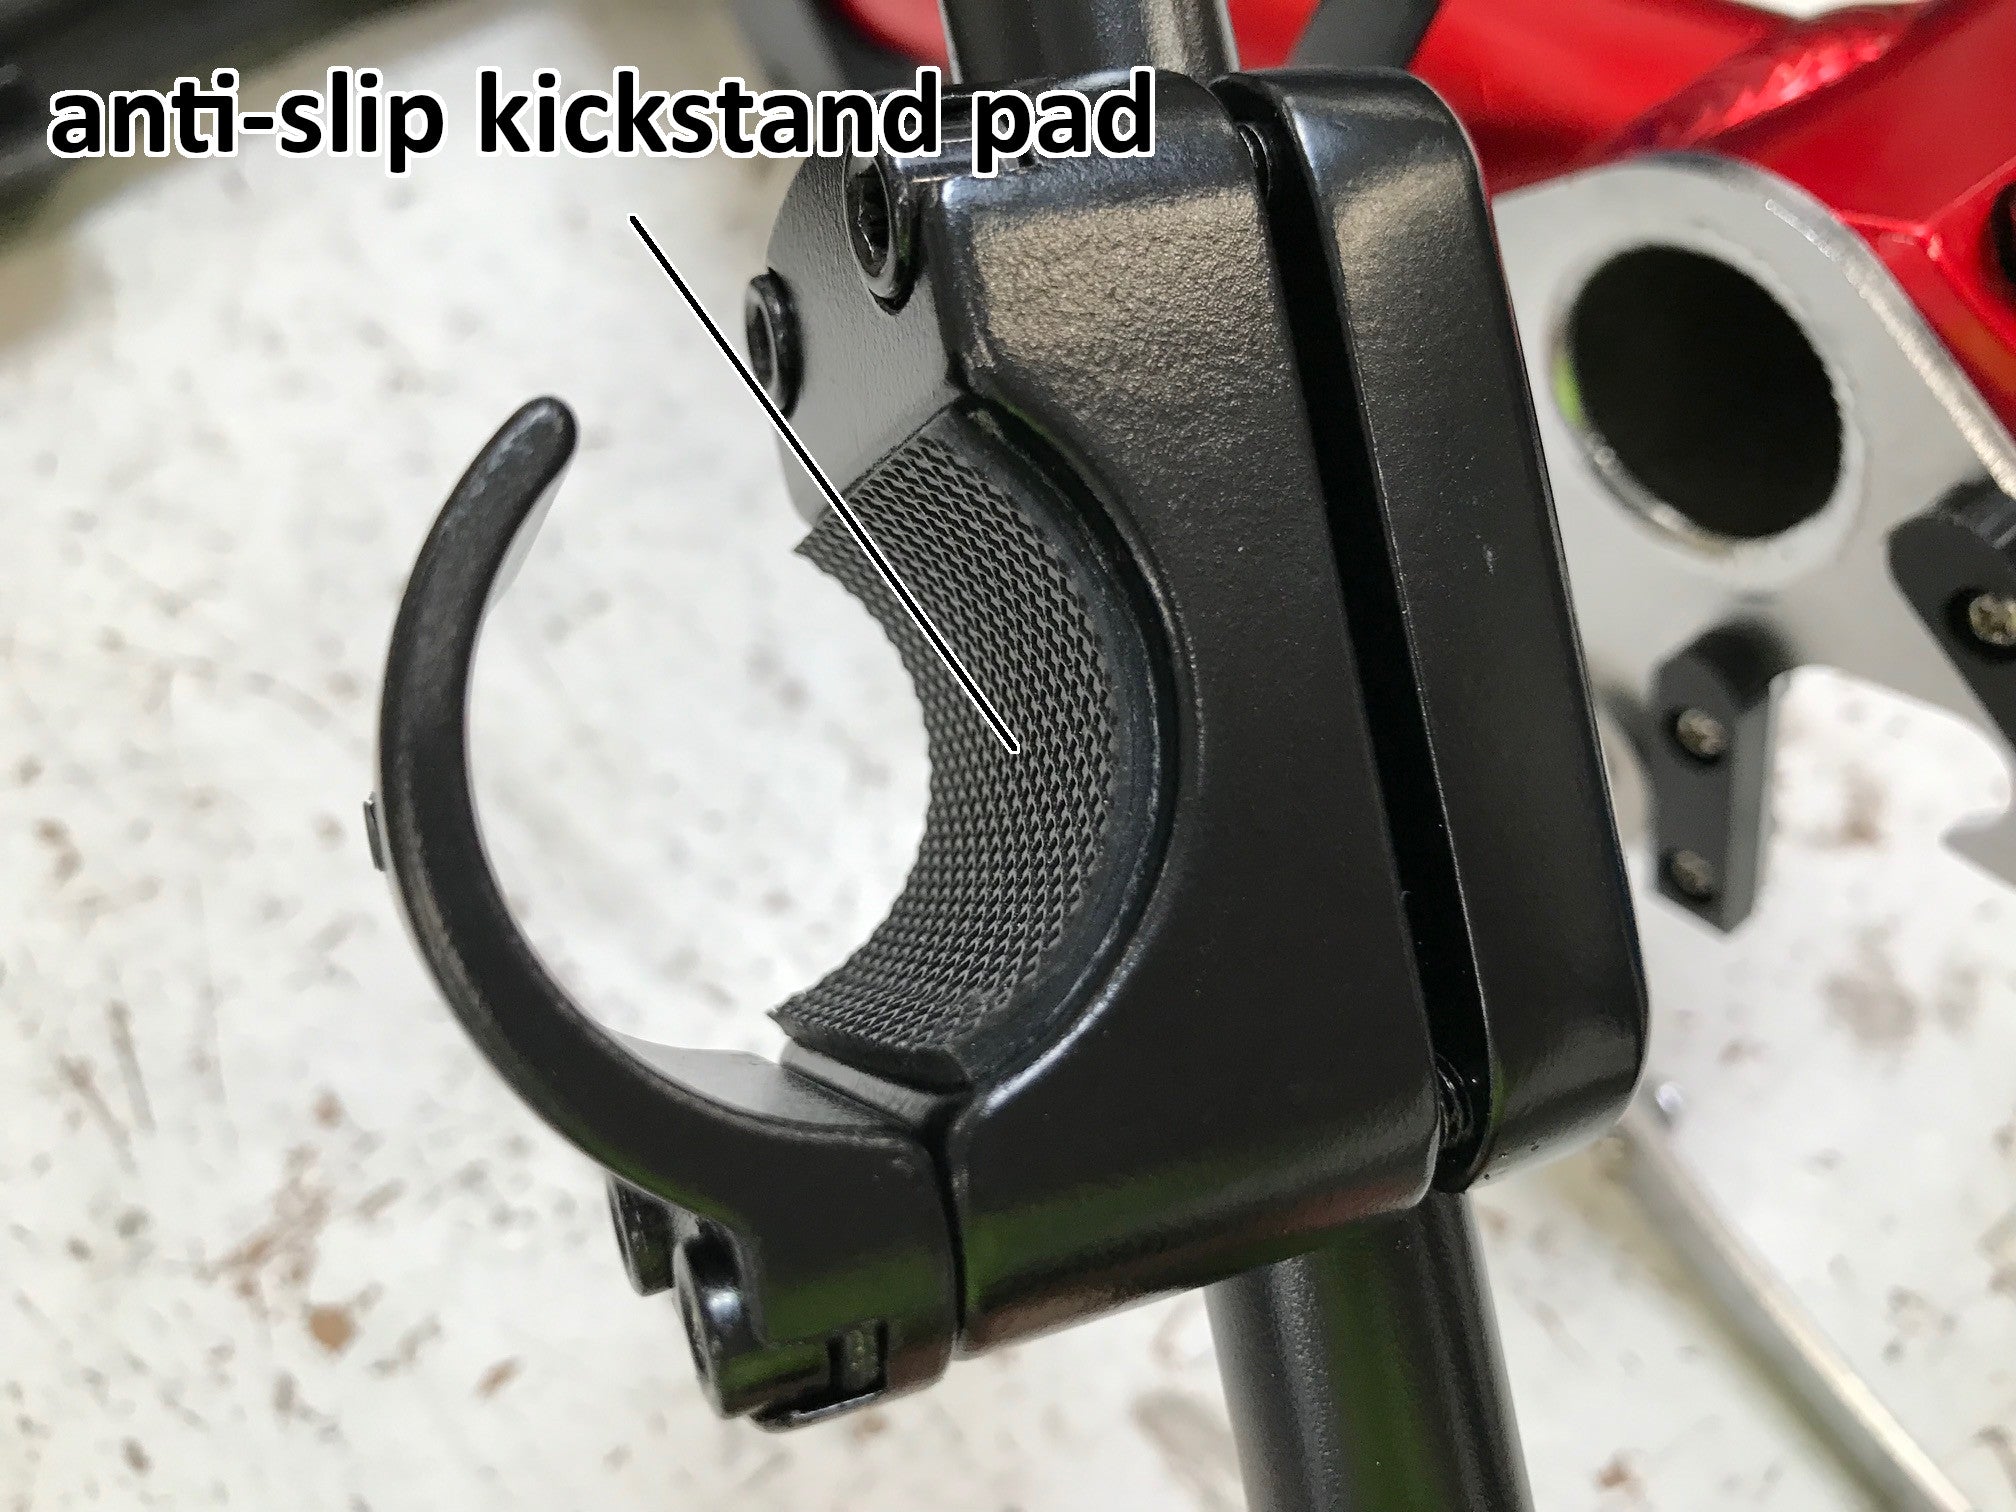 Has your kickstand been slipping or rotating?